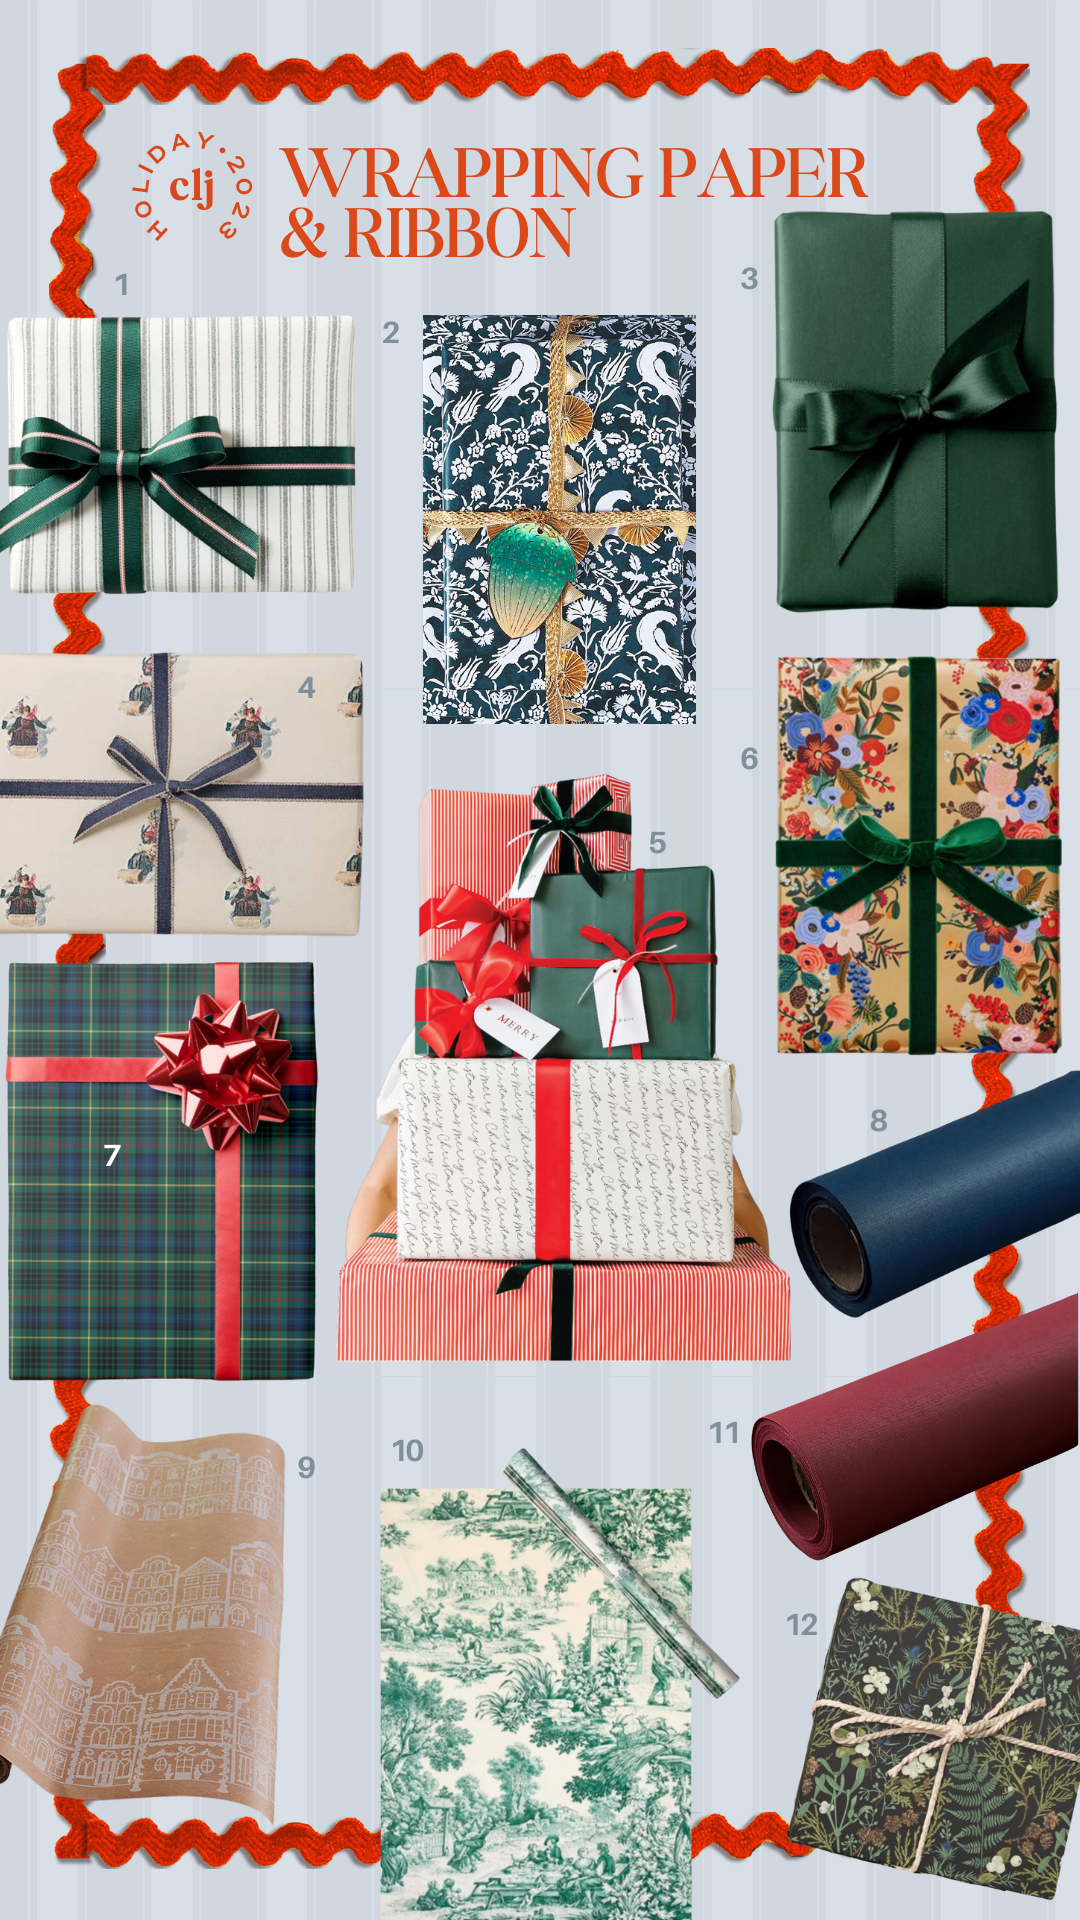 Roll Wrapping Paper Scissors Tags Ribbons Stock Photo